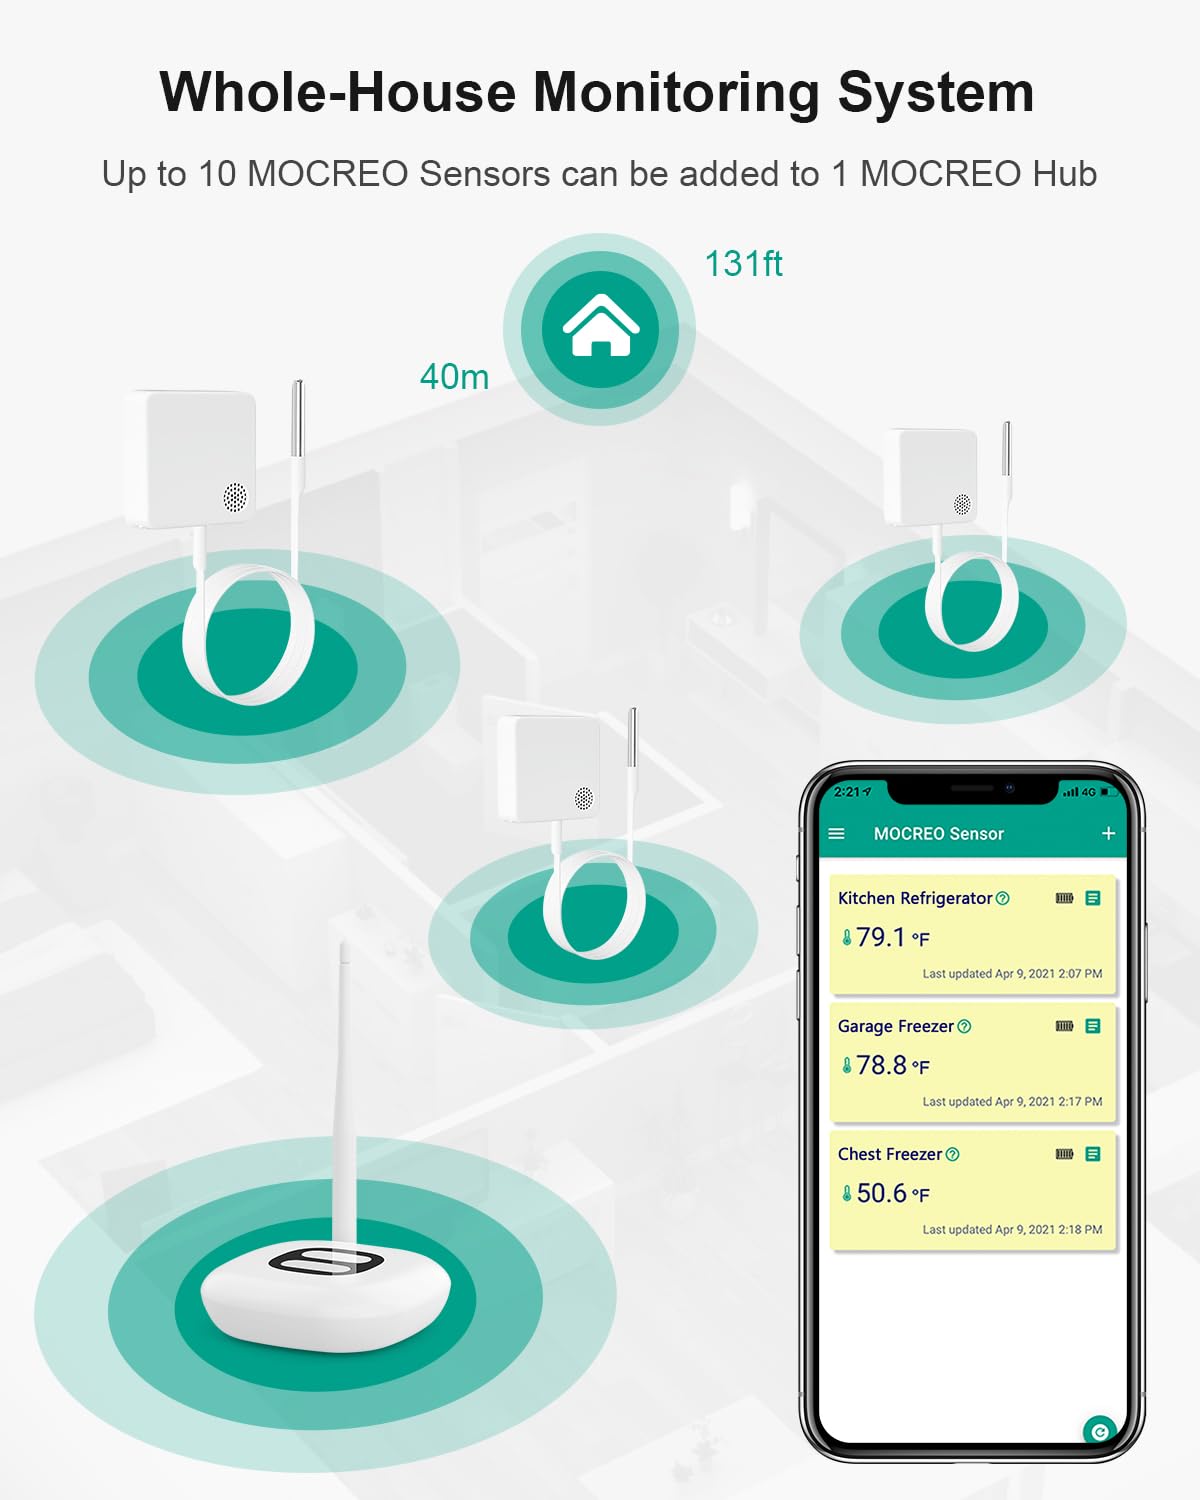 MOCREO WiFi Thermometer Freezer Alarm, Email Alert, App Notification, Data Record Export, No Subscription Fee, Remote Wireless Temperature Sensor for Refrigerator, Freezer, Hot Tub (4 Pack)